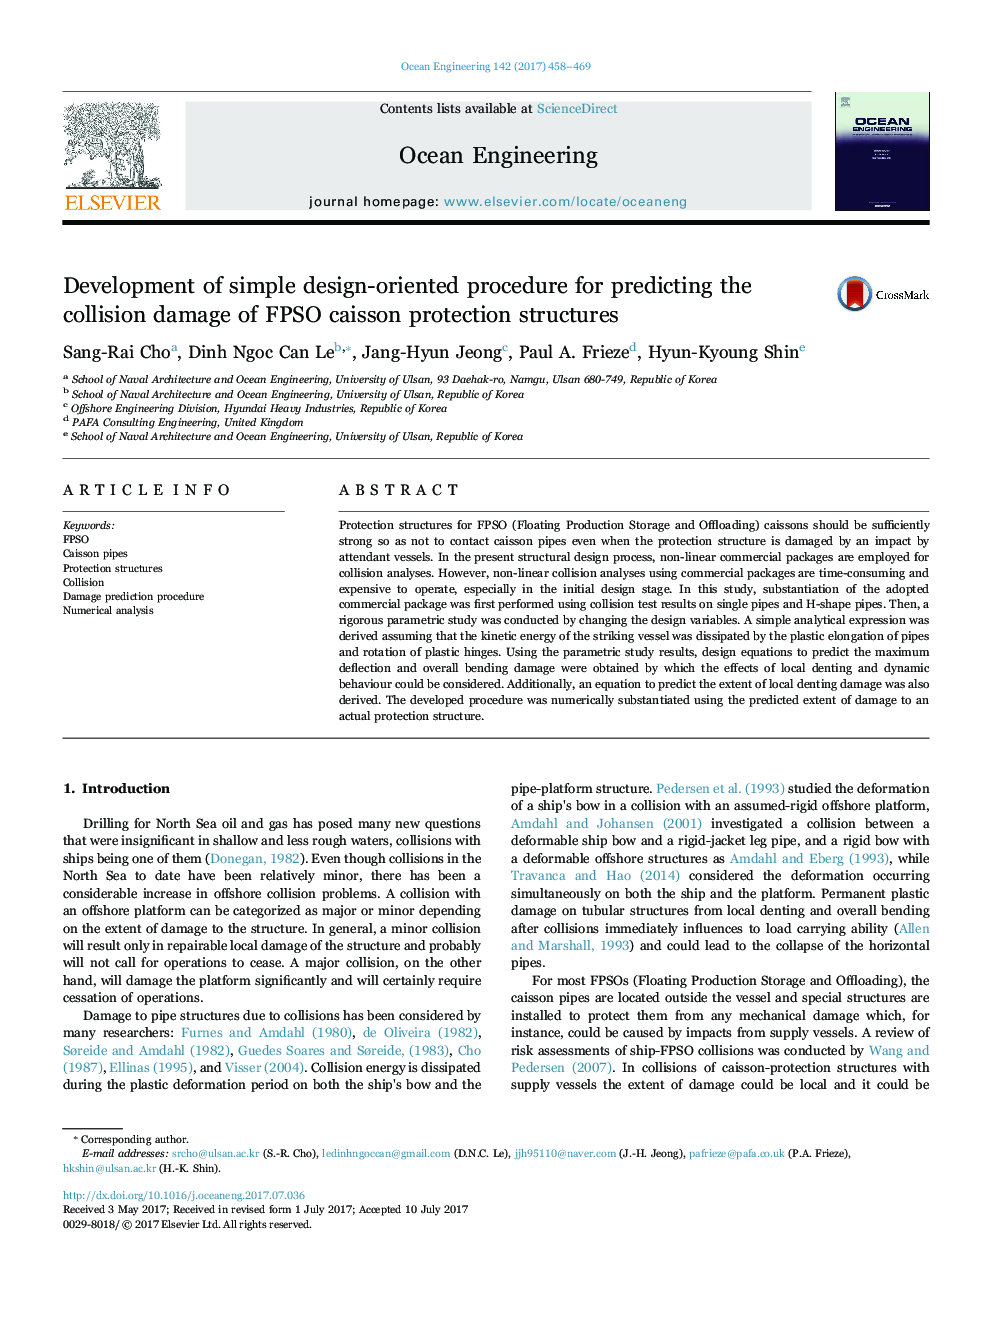 Development of simple design-oriented procedure for predicting the collision damage of FPSO caisson protection structures